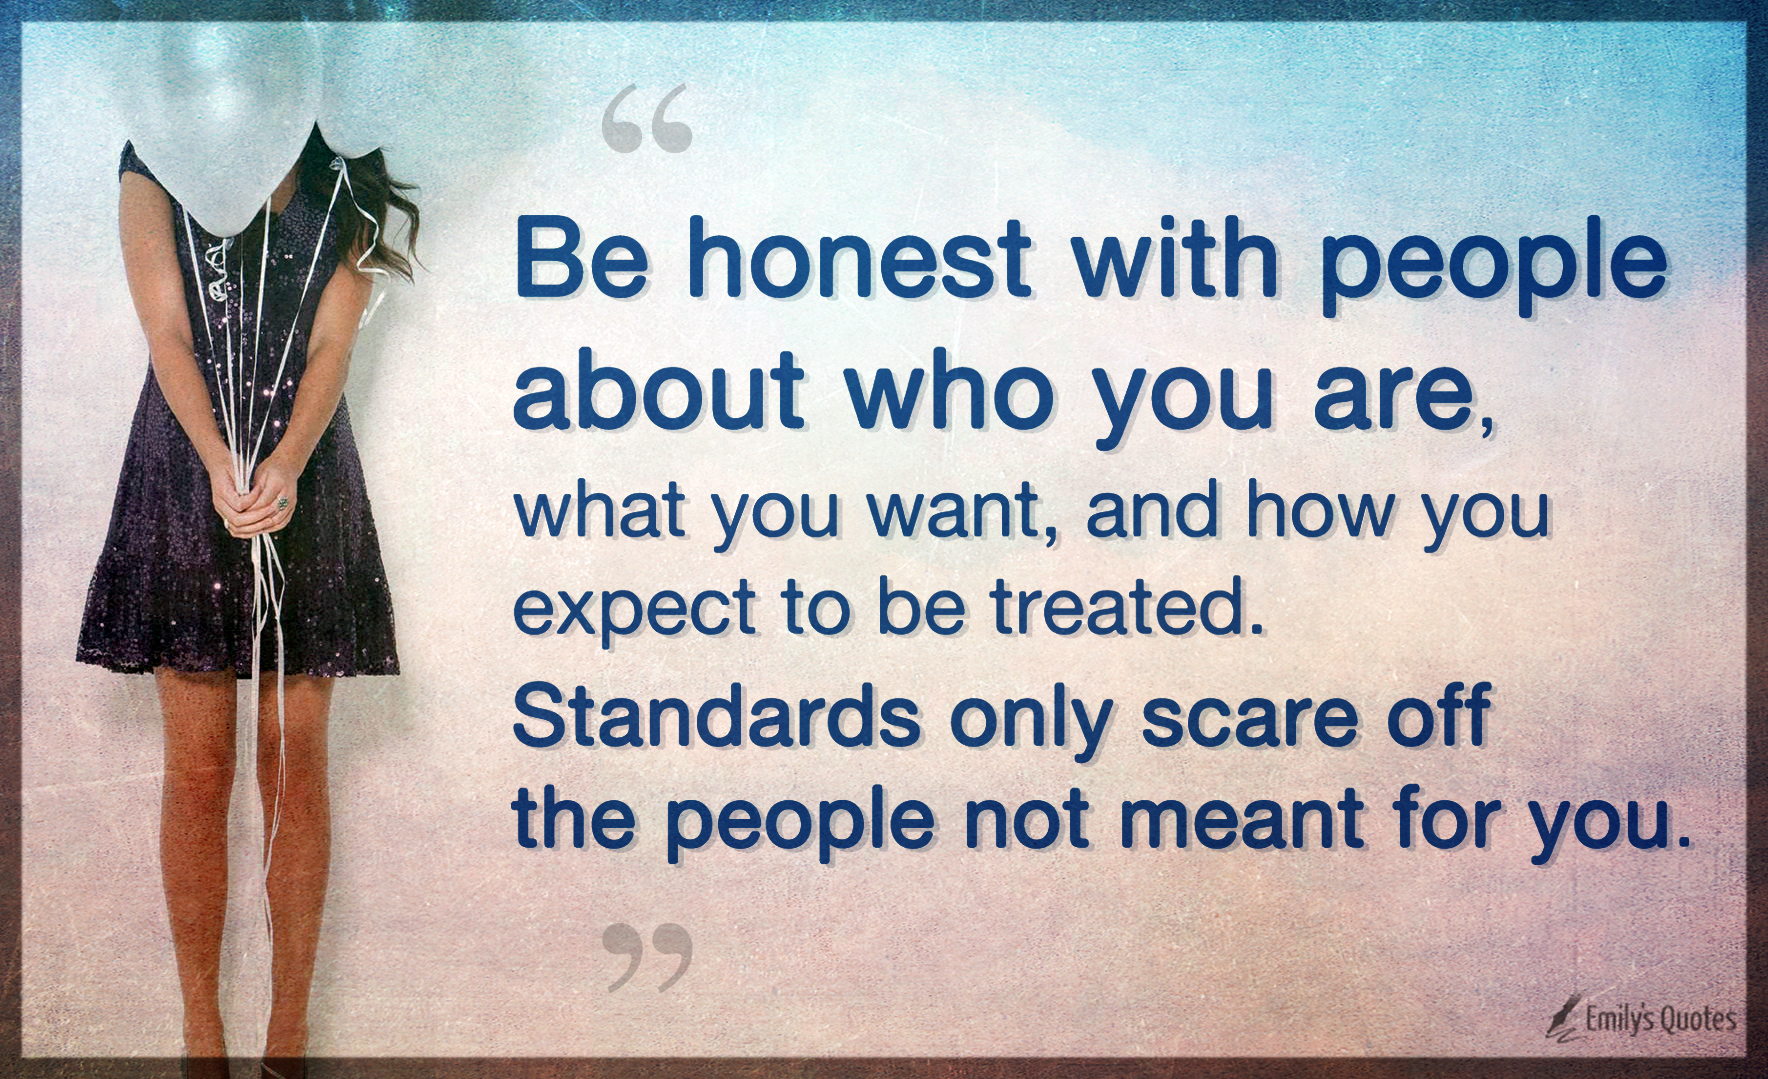 Be honest with people about who you are, what you want, and how you expect to be treated